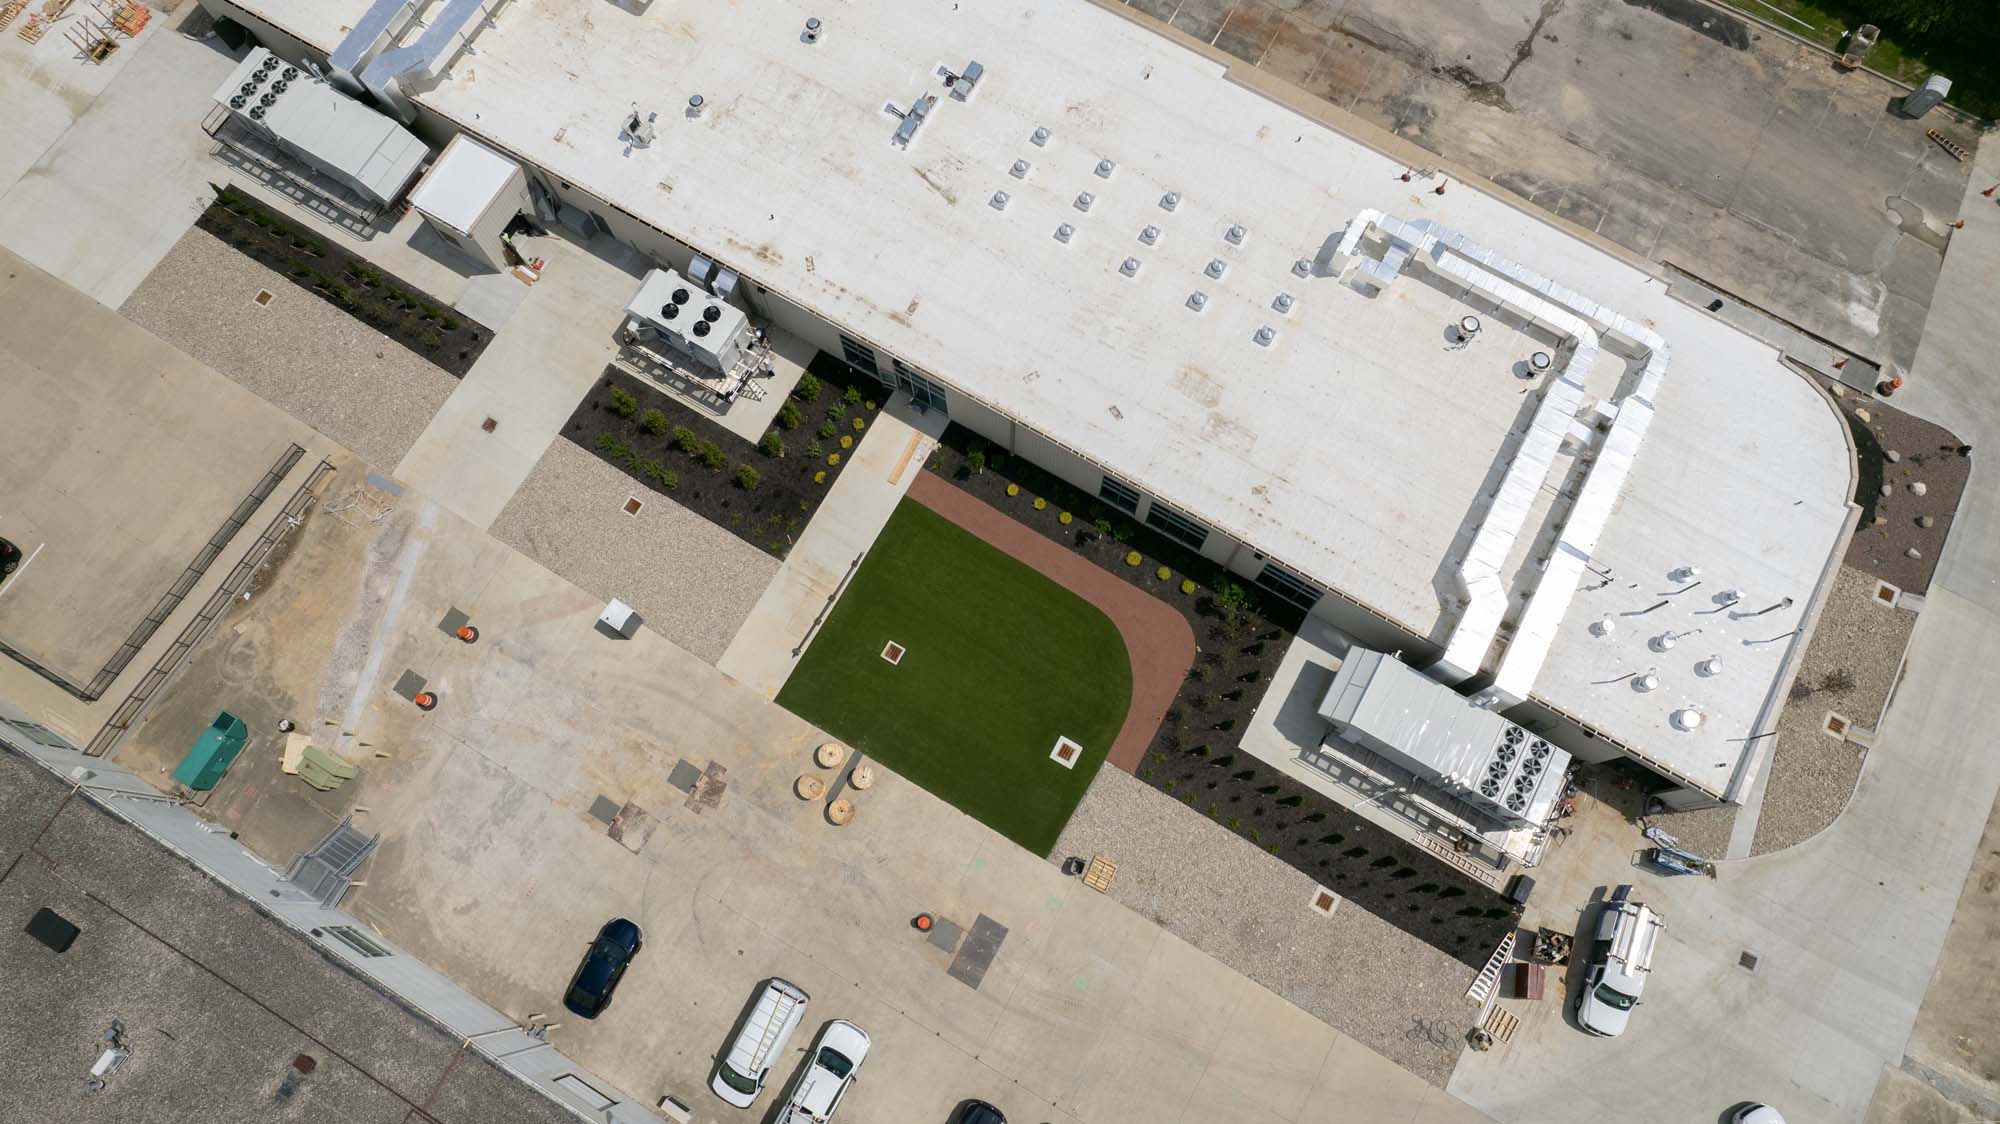 Drone image of commercial landscaping for the second phase of the ADM WILD Flavors project.